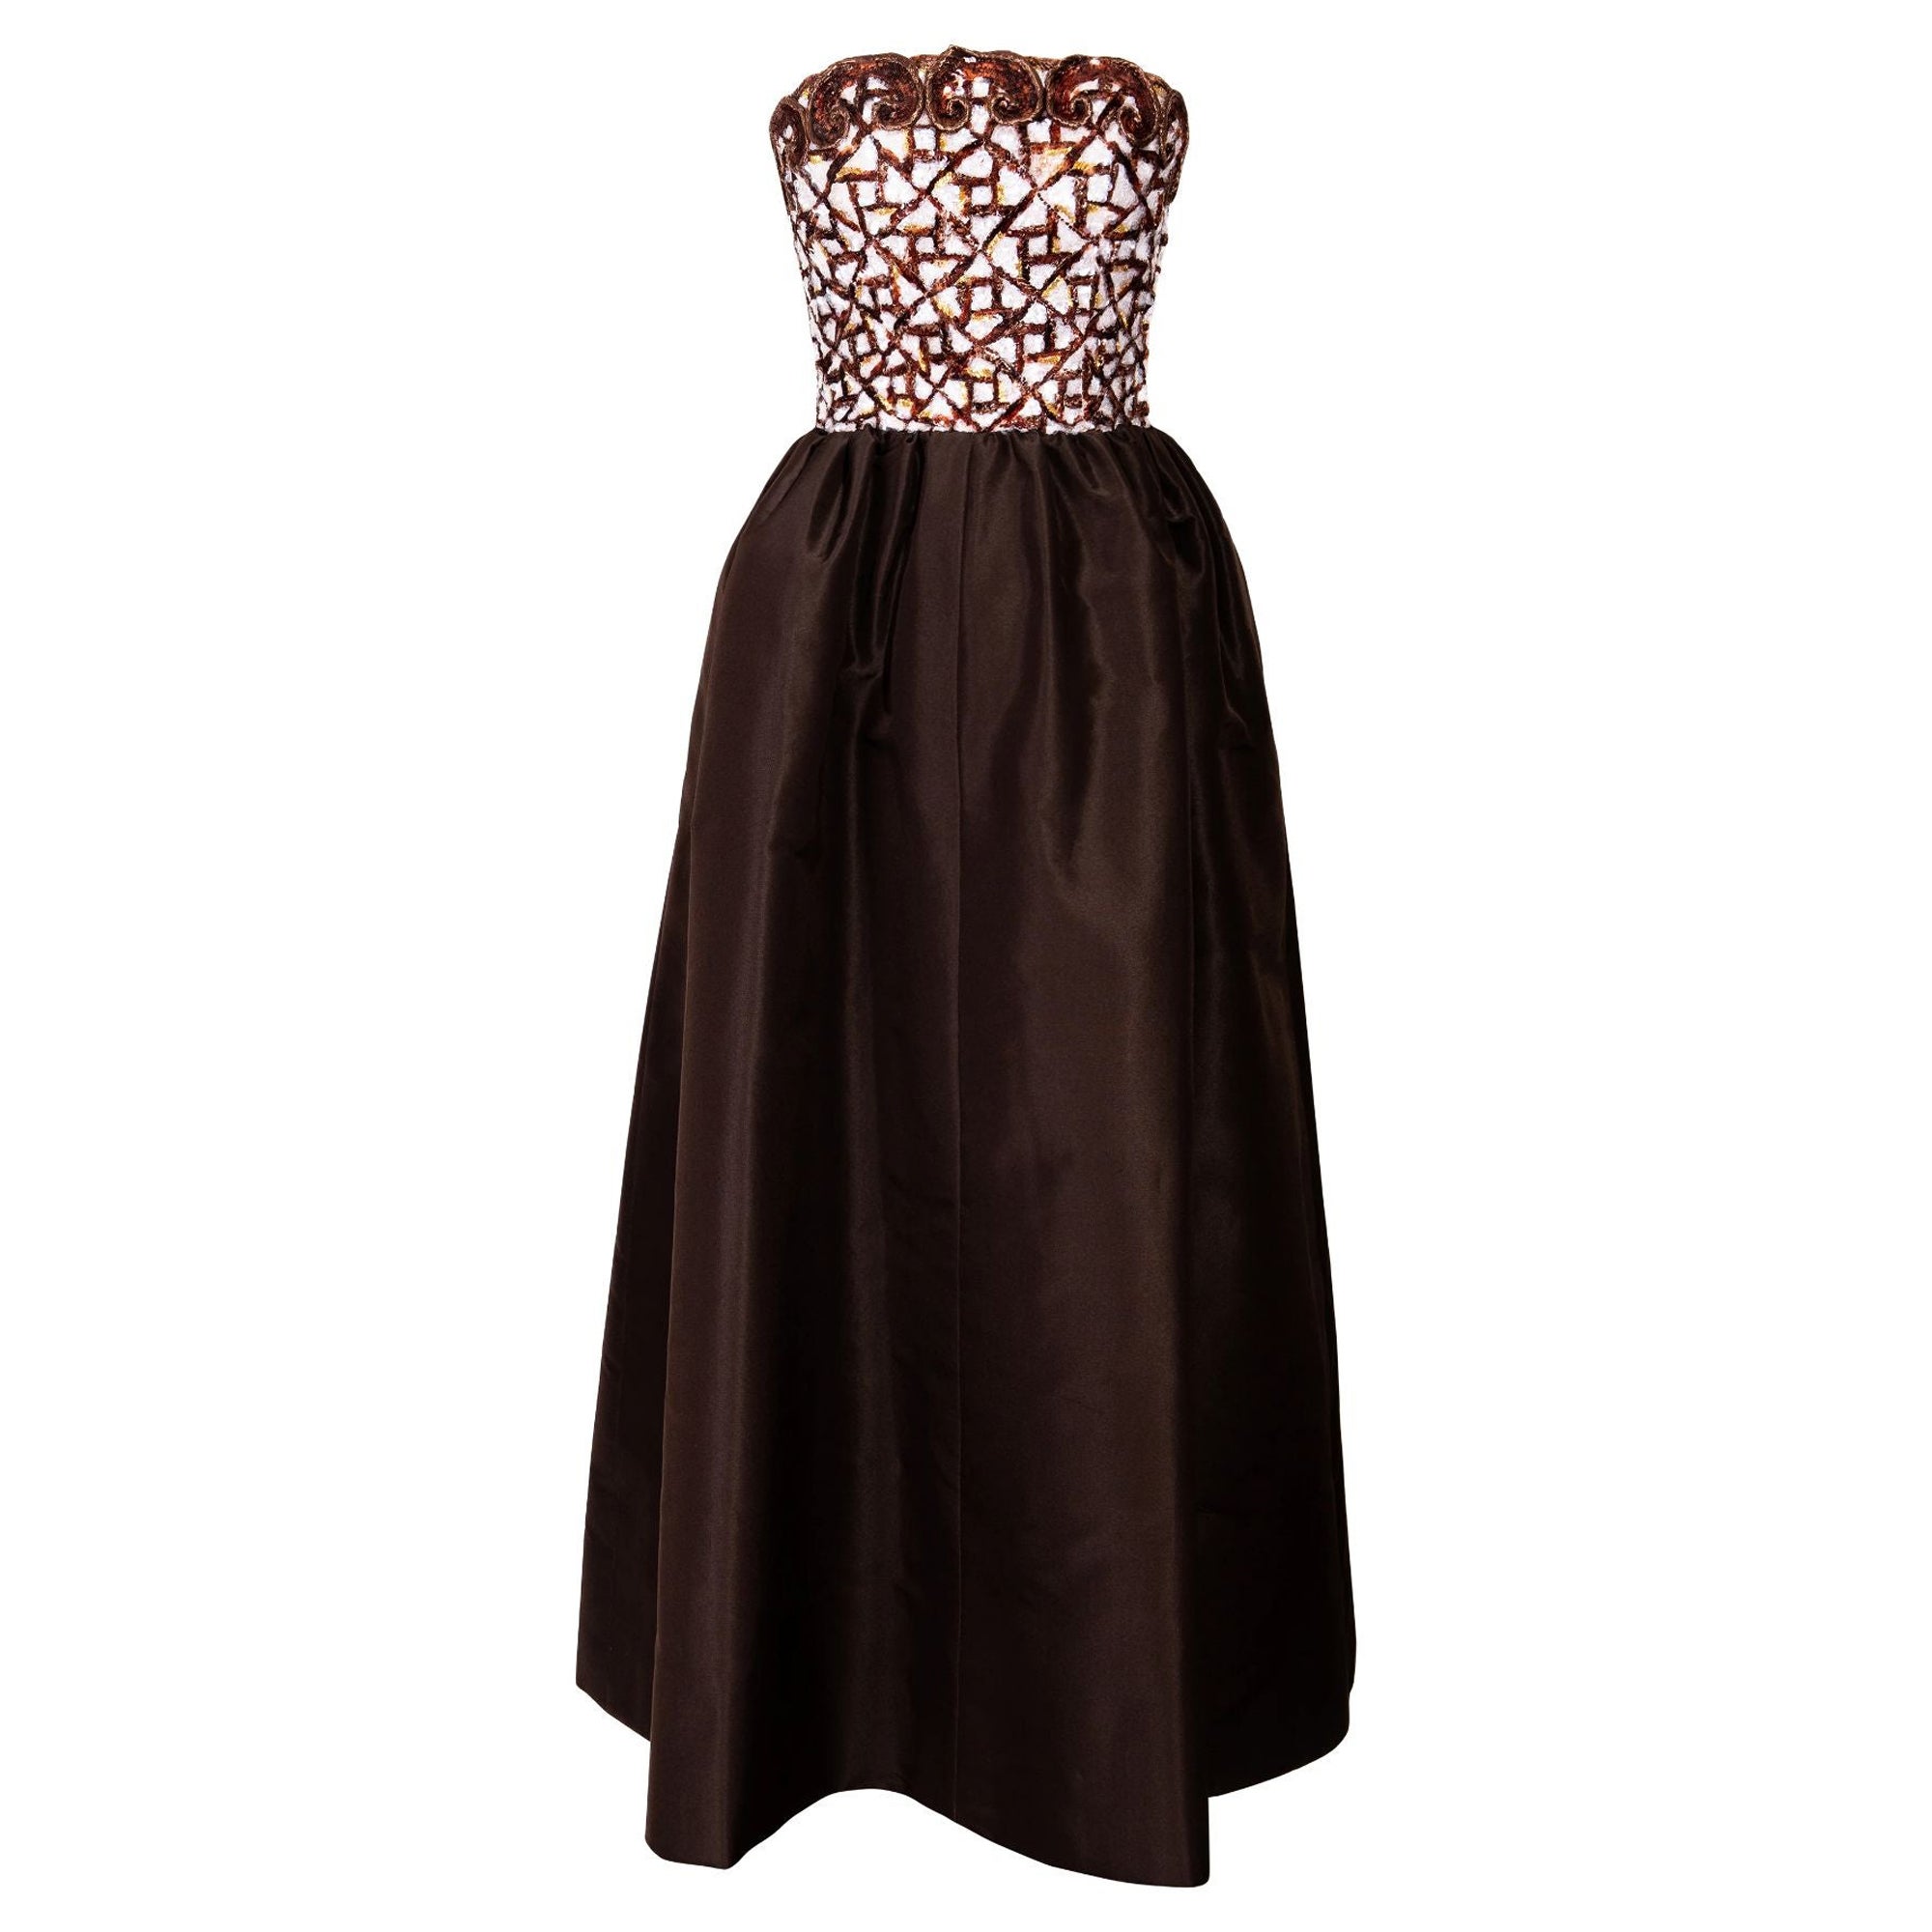 S/S 1992 Givenchy Haute Couture Deep Brown Strapless Gown with Embroidered Bust For Sale